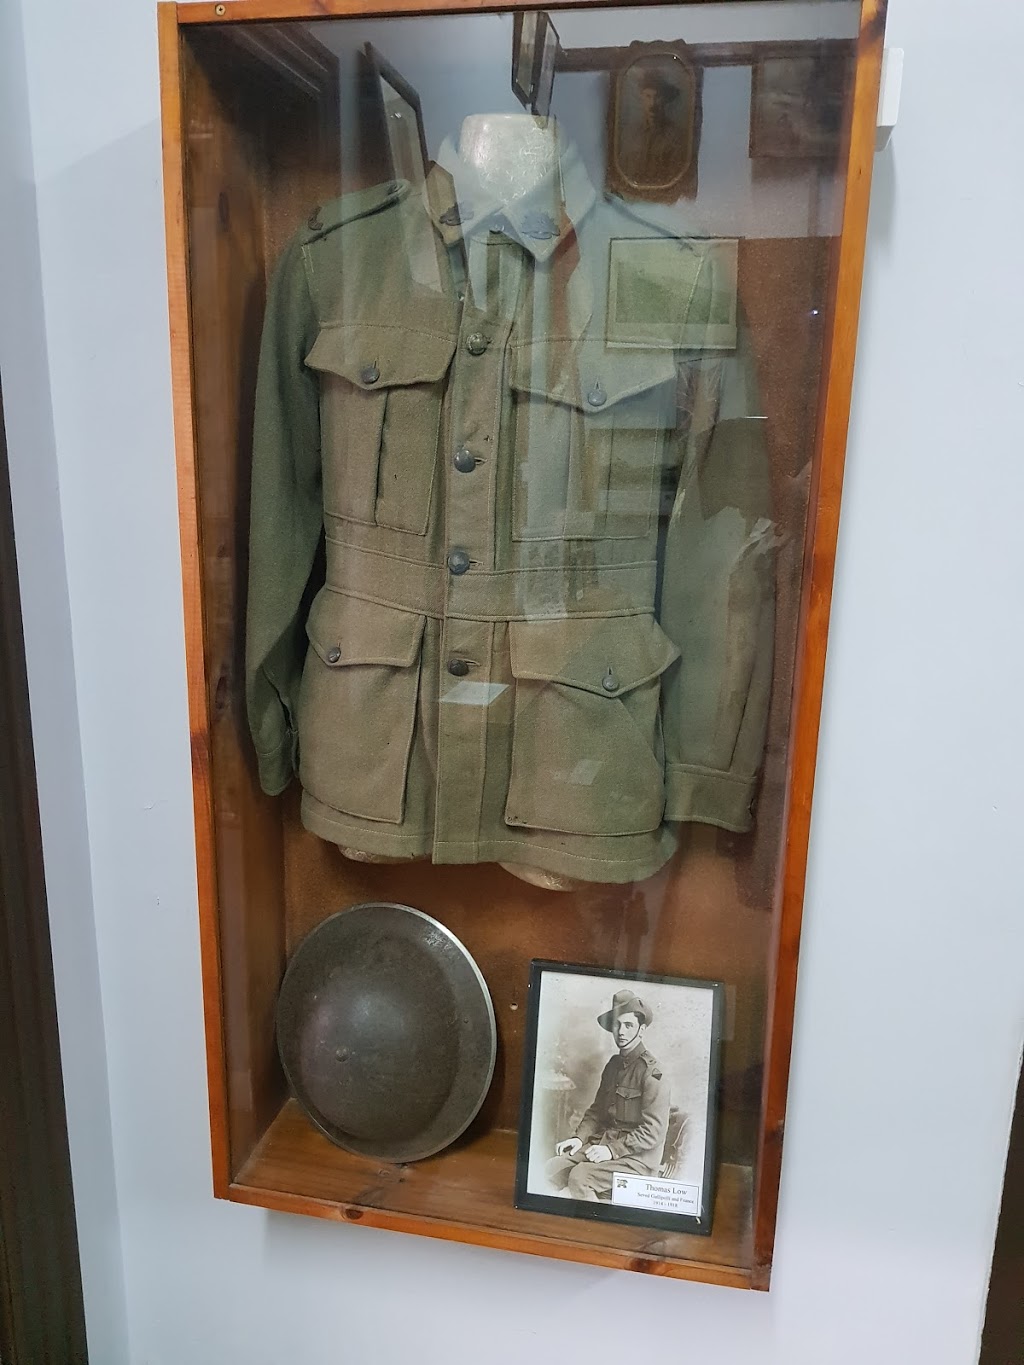 Frank Partridge Military Museum | museum | 29 High St, Bowraville NSW 2449, Australia | 0265647056 OR +61 2 6564 7056